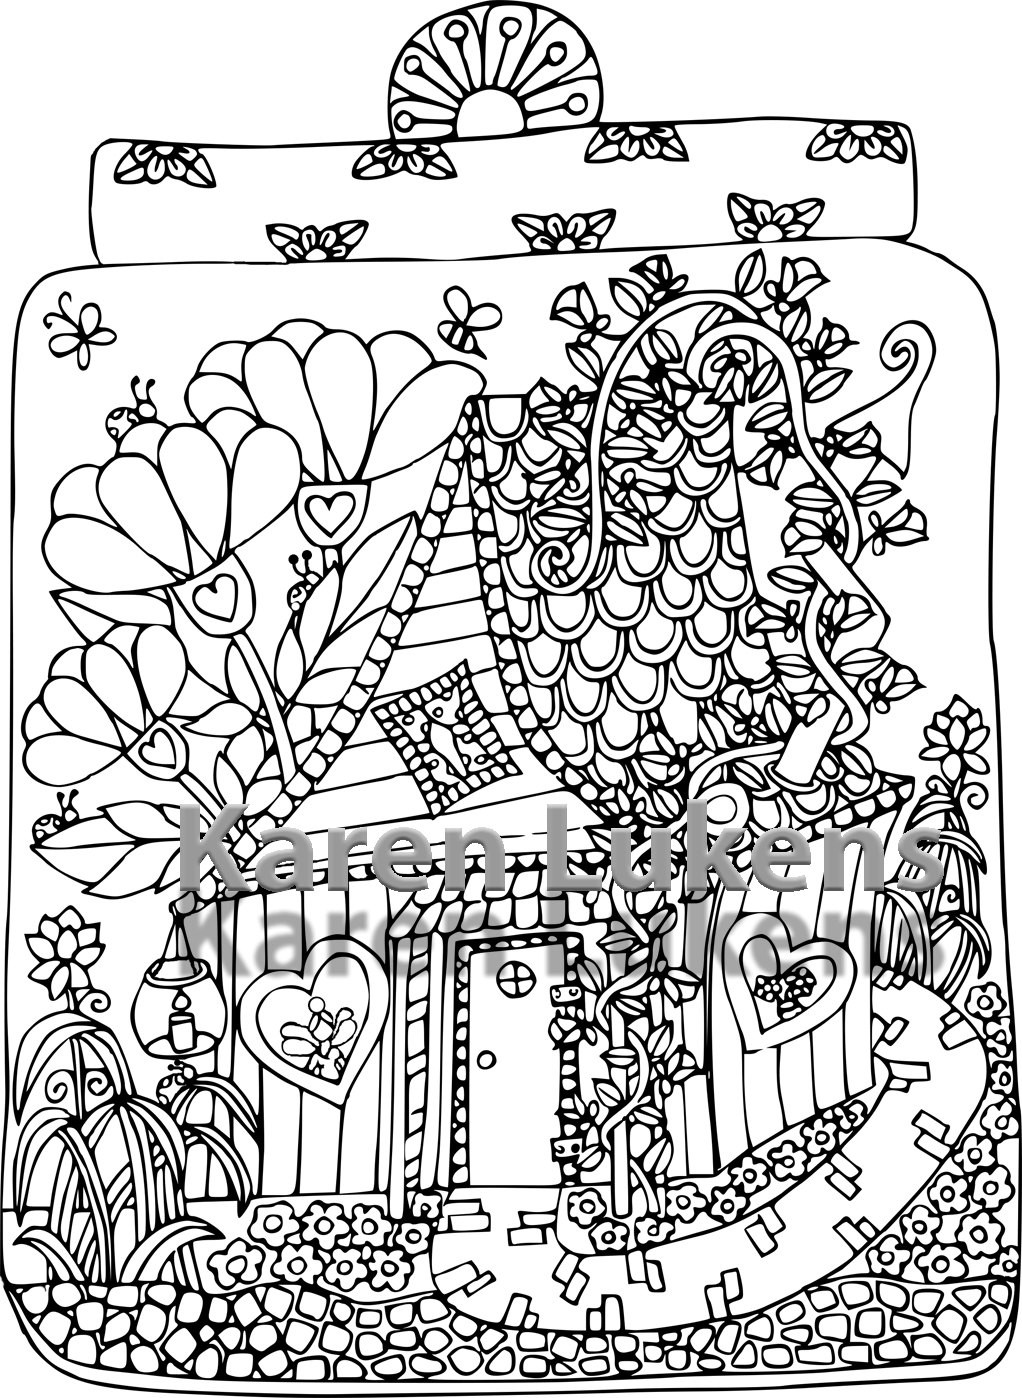 fairy-house-coloring-pages-at-getdrawings-free-download